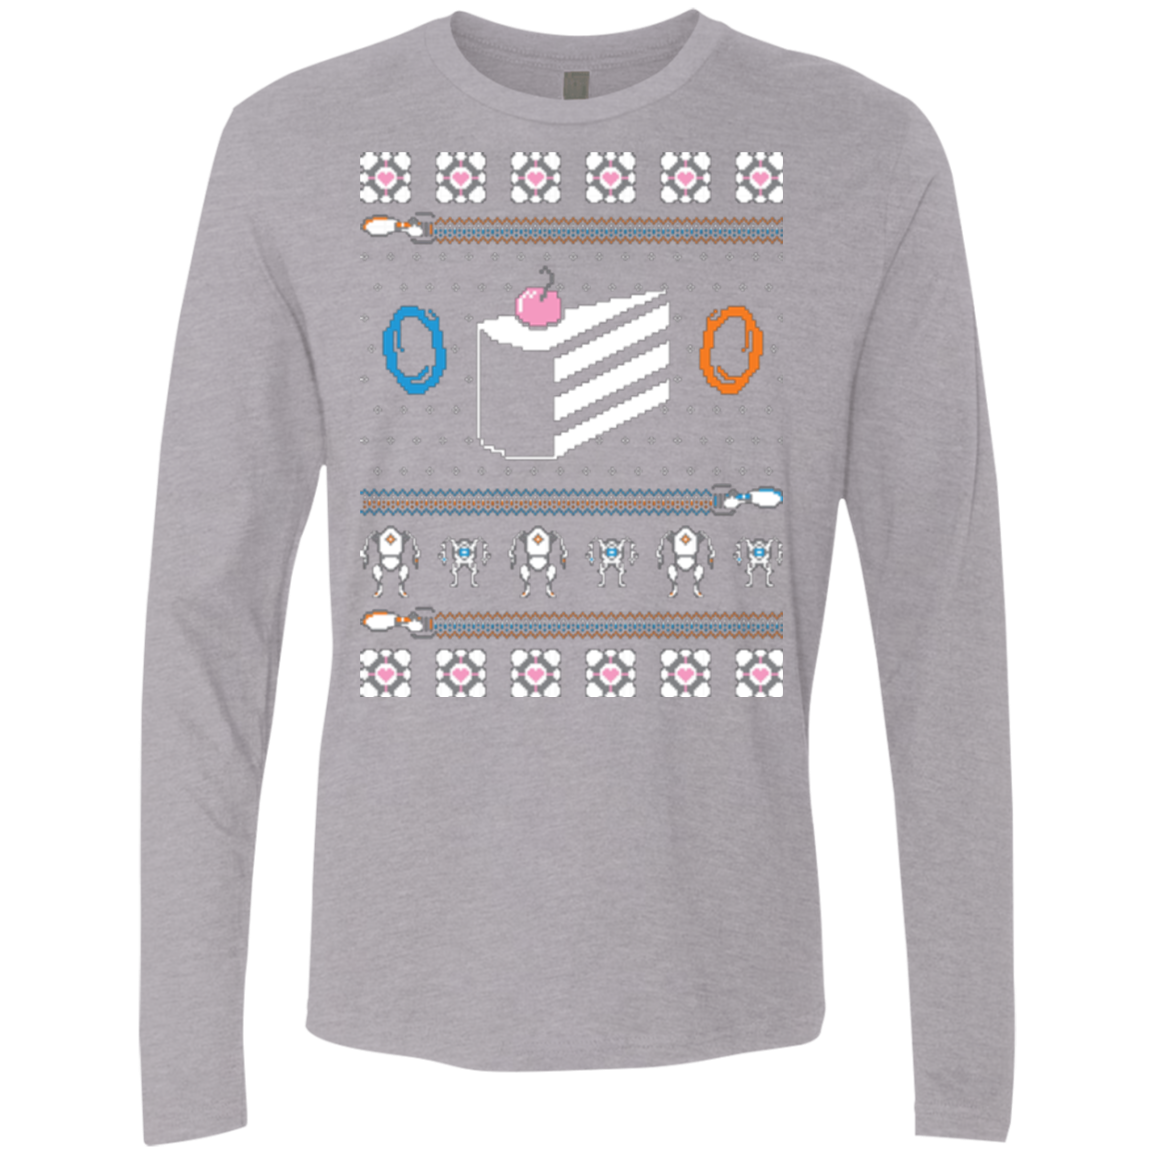 The Christmas Cake Is A Lie Men's Premium Long Sleeve